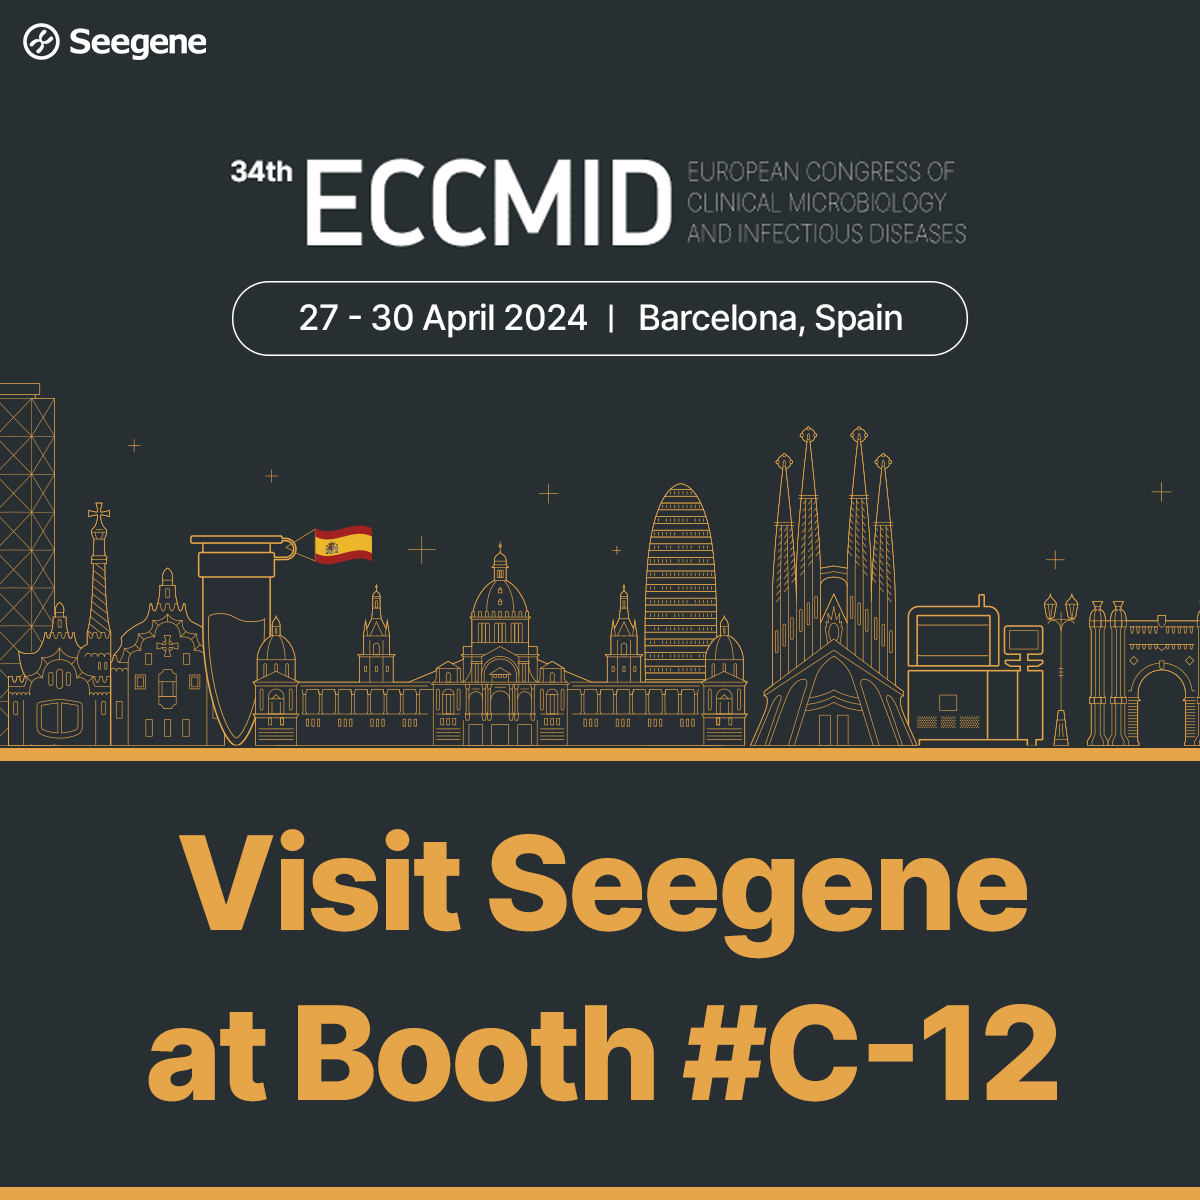 The 34th ECCMID is just around the corner! Come and meet Seegene at booth C-12! We look forward to meeting you😊 #Seegene #ECCMID #ECCMID2024